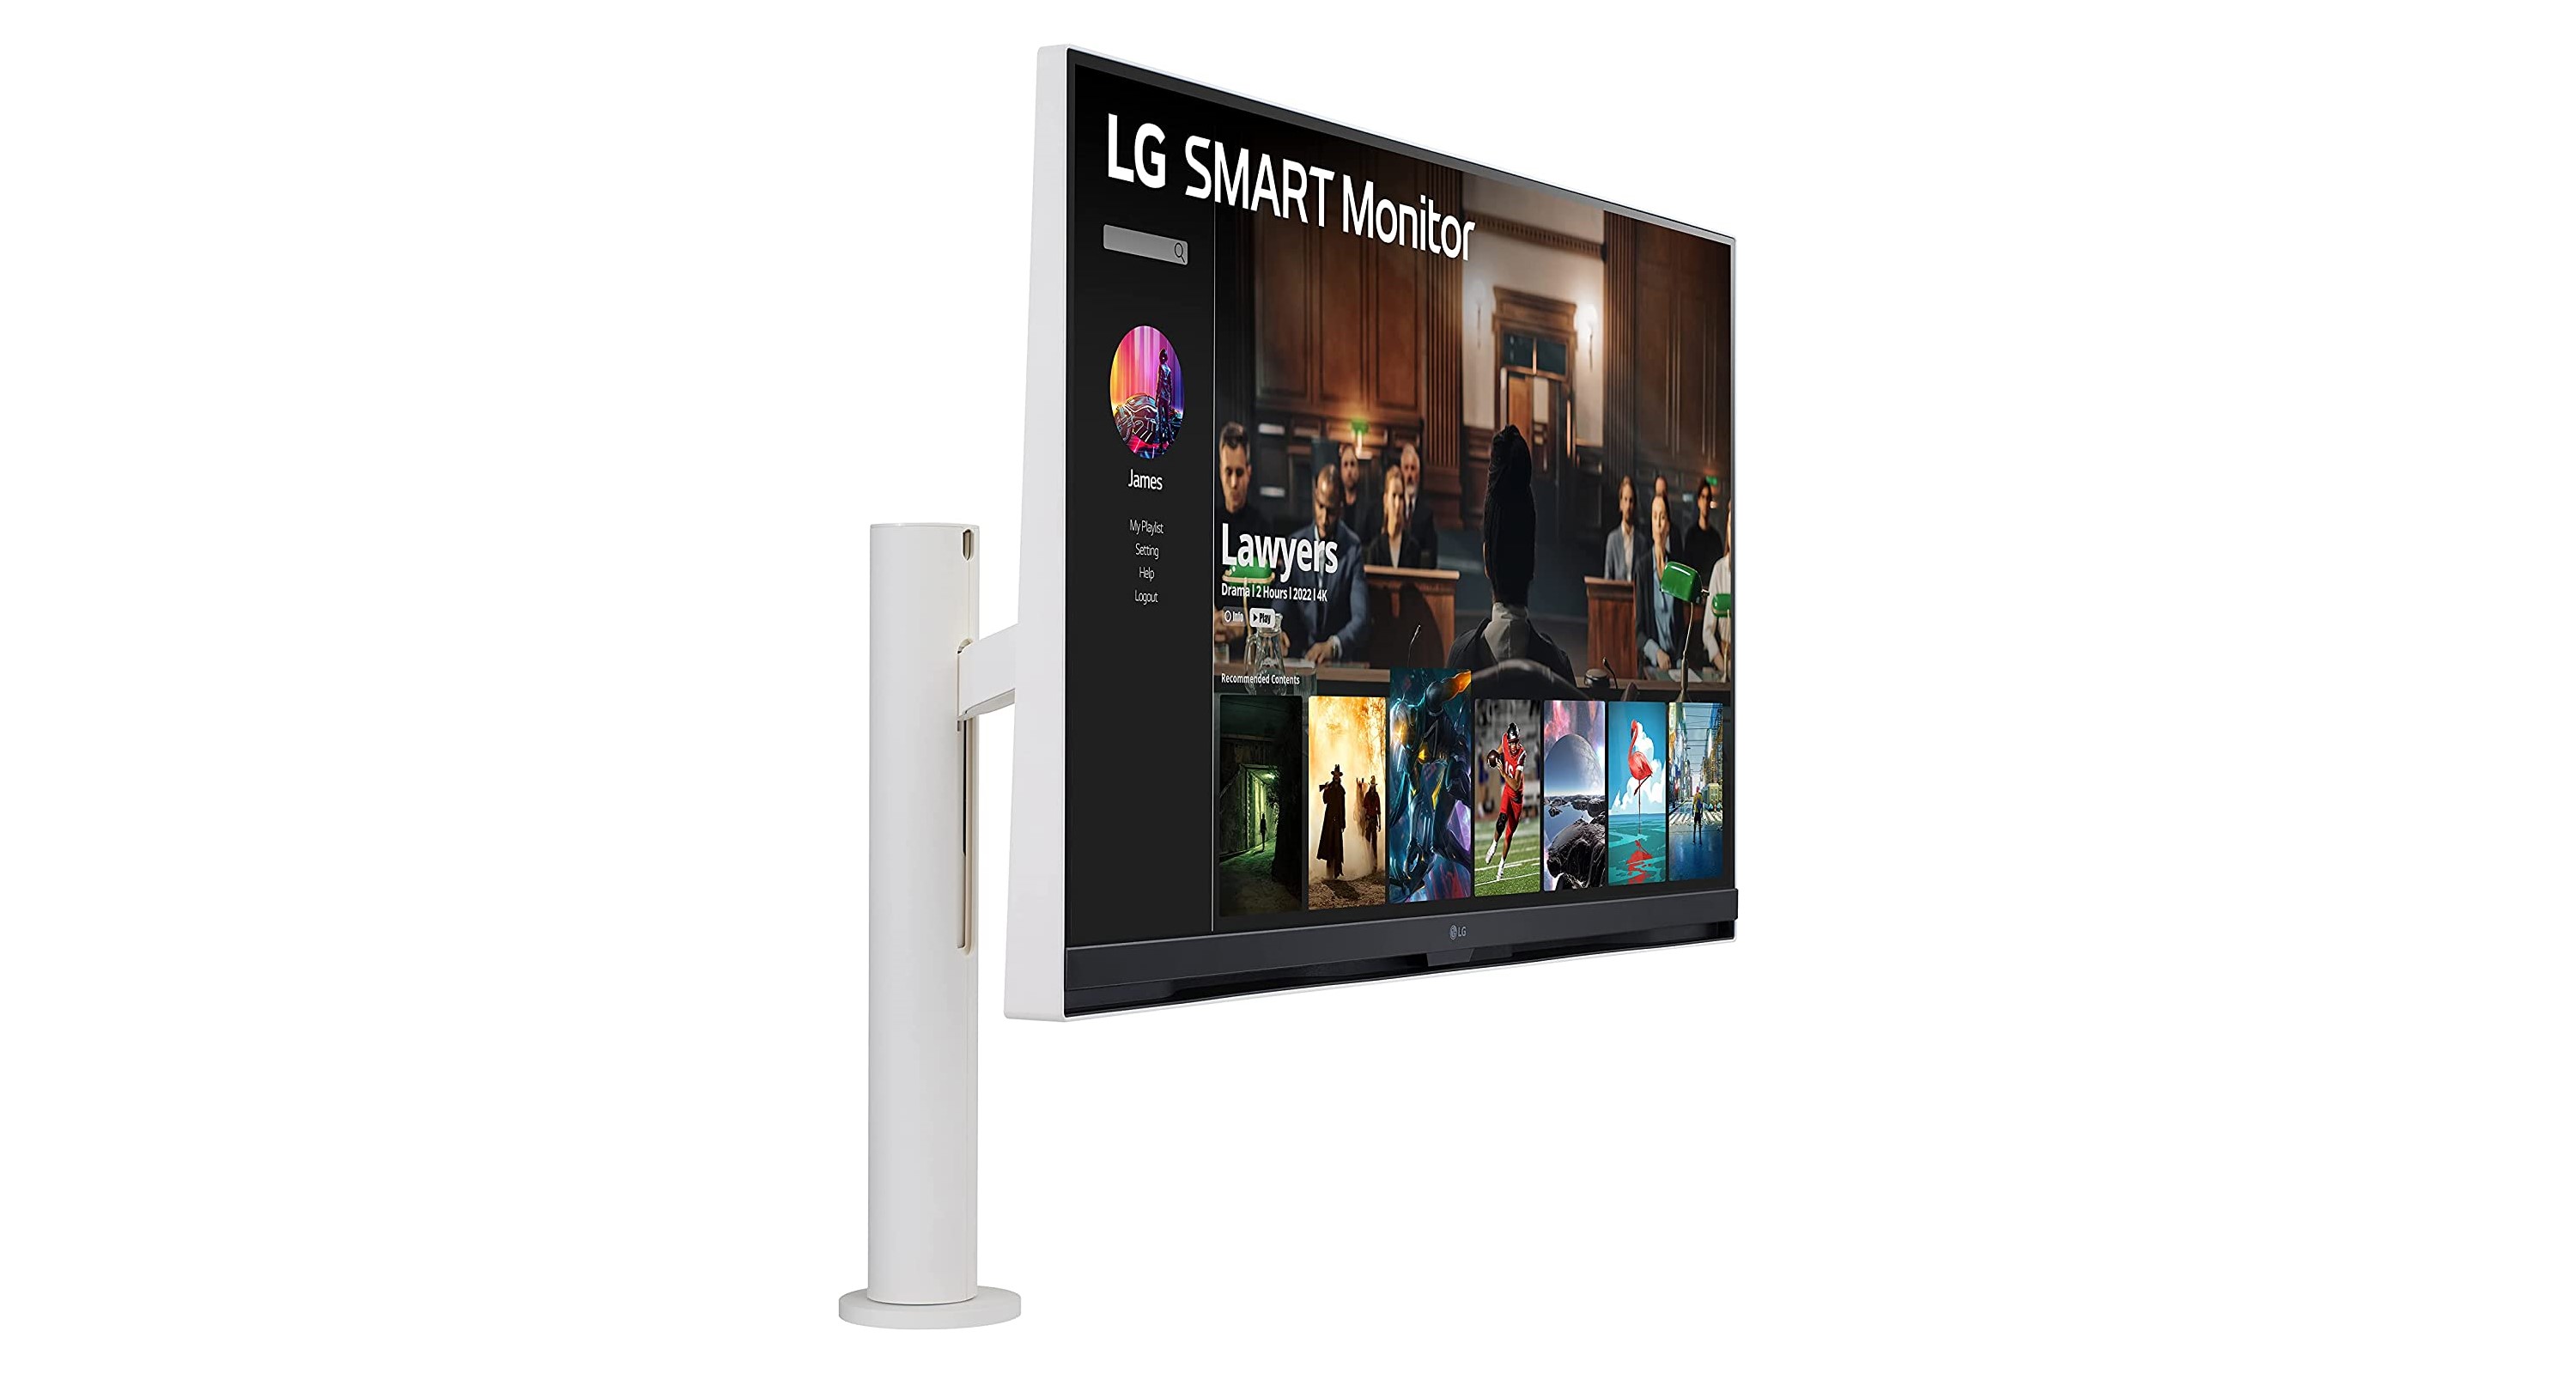 LG Smart Monitor 32SQ780S is unleashed the US market to take the 4K Samsung M8 on NotebookCheck.net News